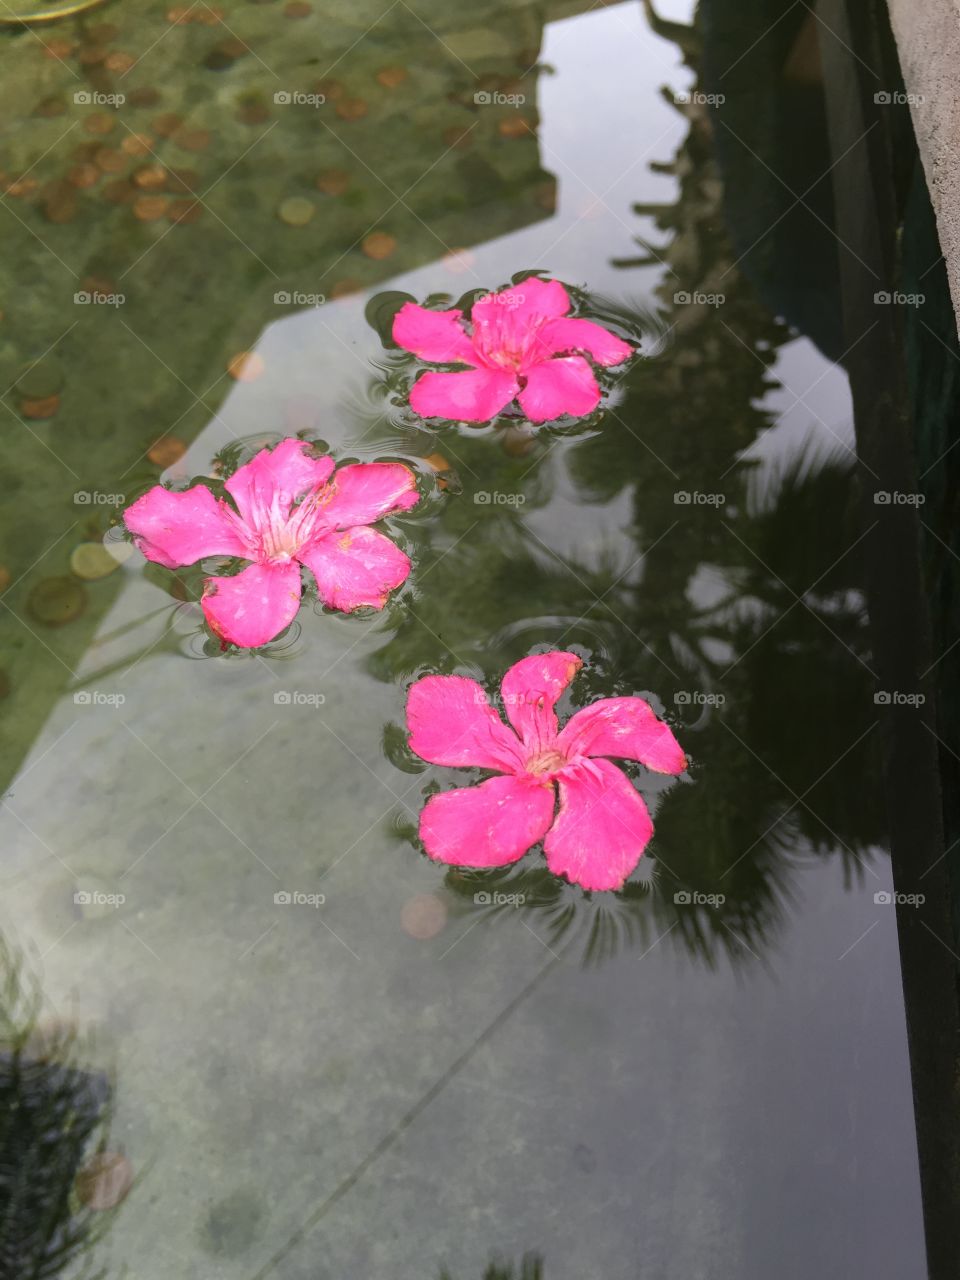 Flowers in the Fountain